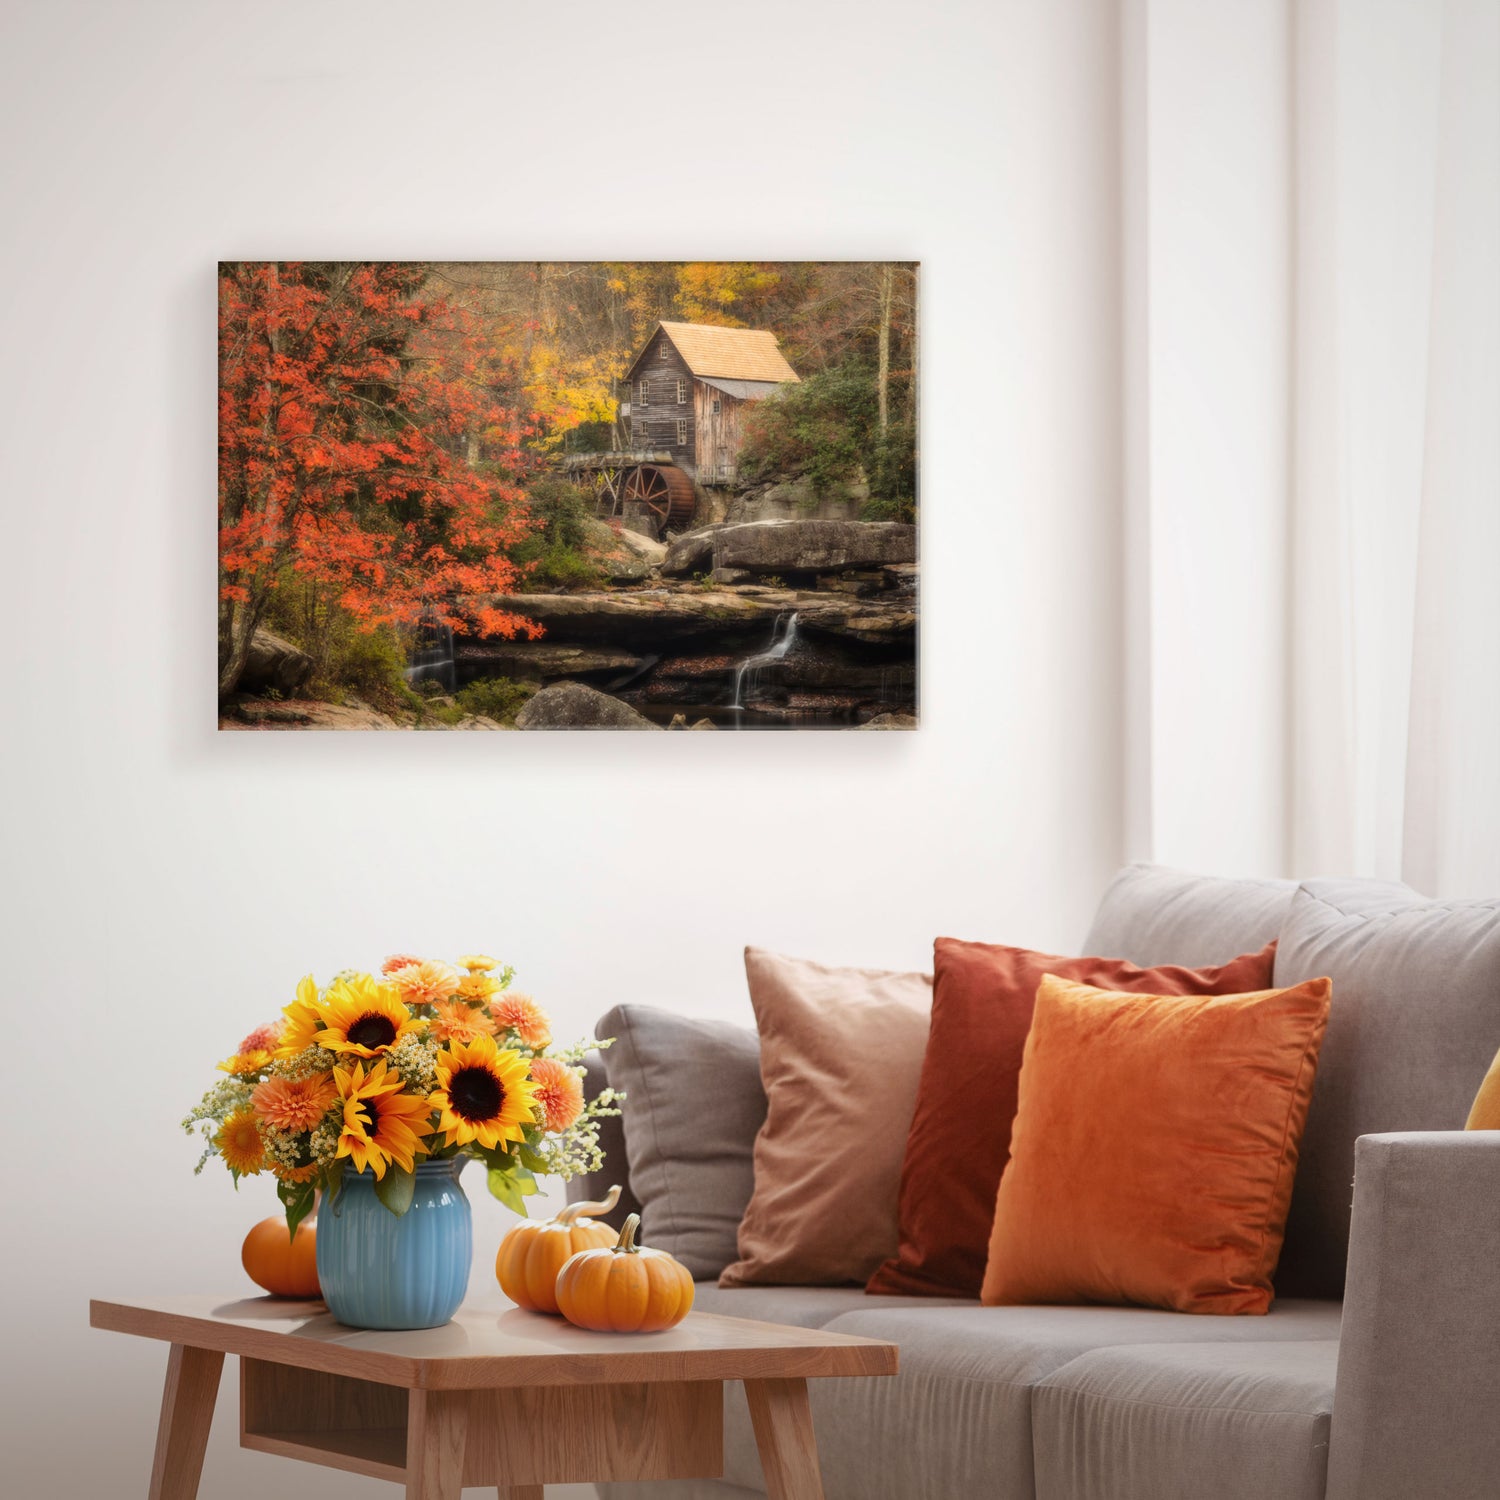 Archival quality canvas print showcasing the rustic Glade Creek Grist Mill against a backdrop of colorful fall leaves, with a sawtooth hanger for mounting.